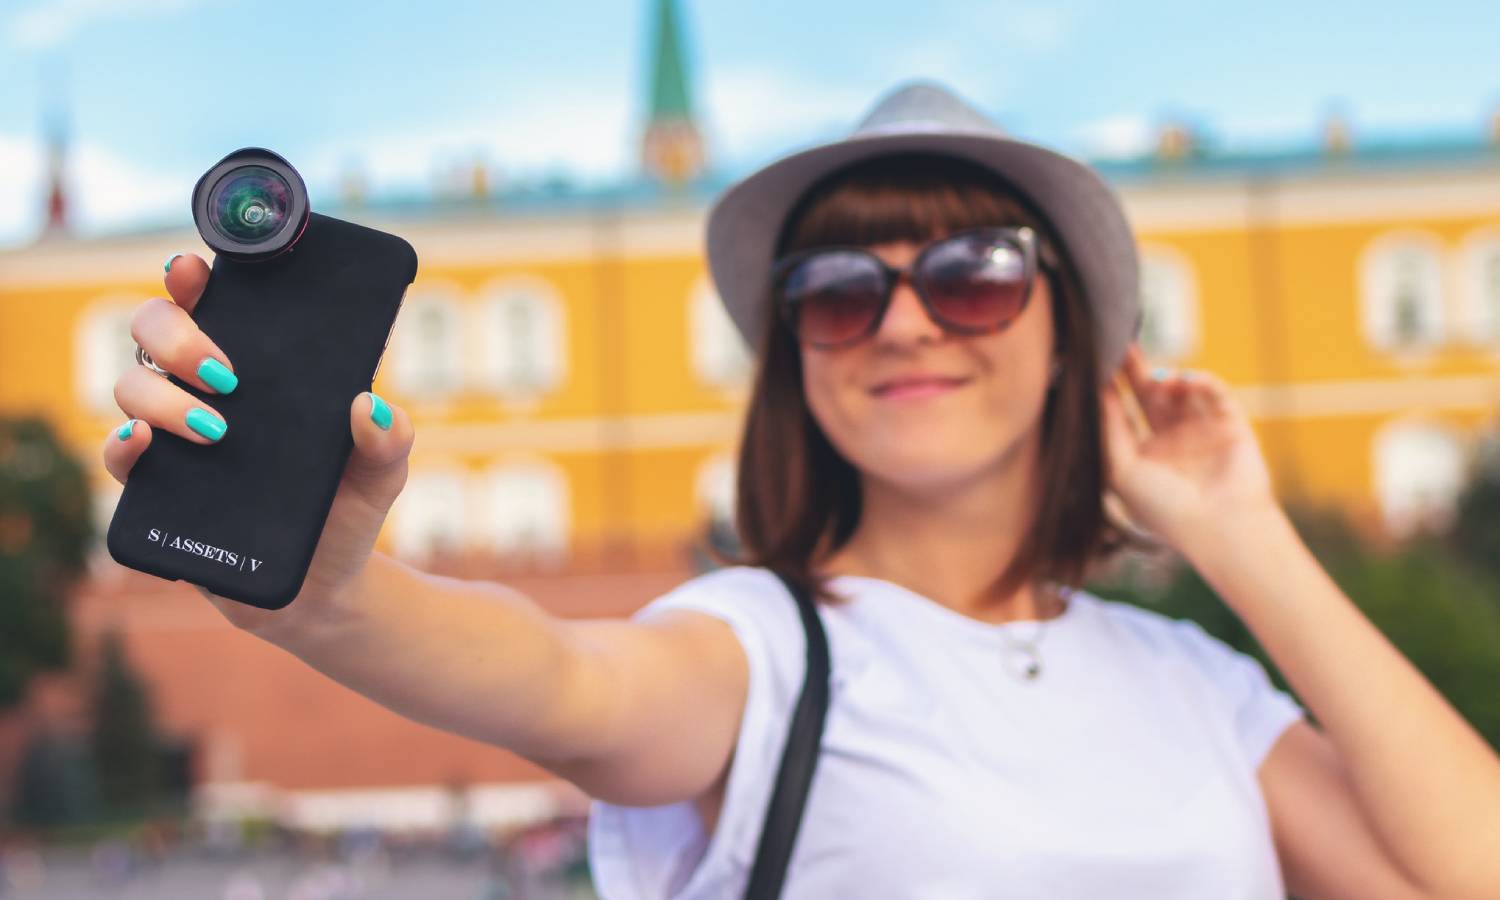 How To Take a Good Selfie - Tips for Taking Pictures of Yourself